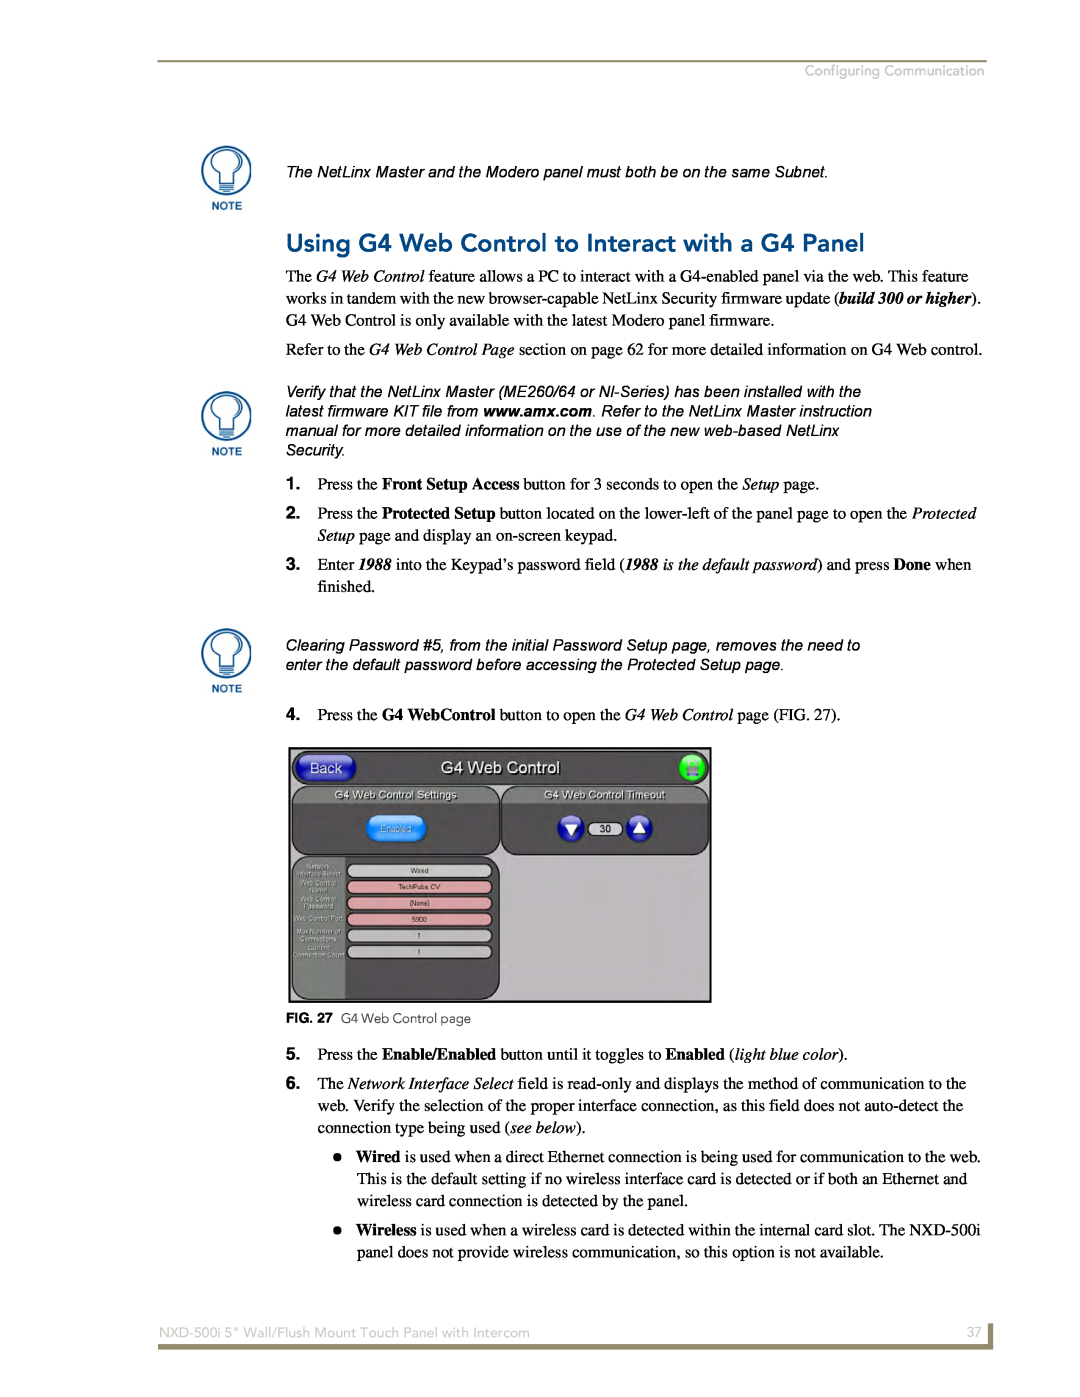 AMX NXD-500i manual Using G4 Web Control to Interact with a G4 Panel, G4 Web Control page 